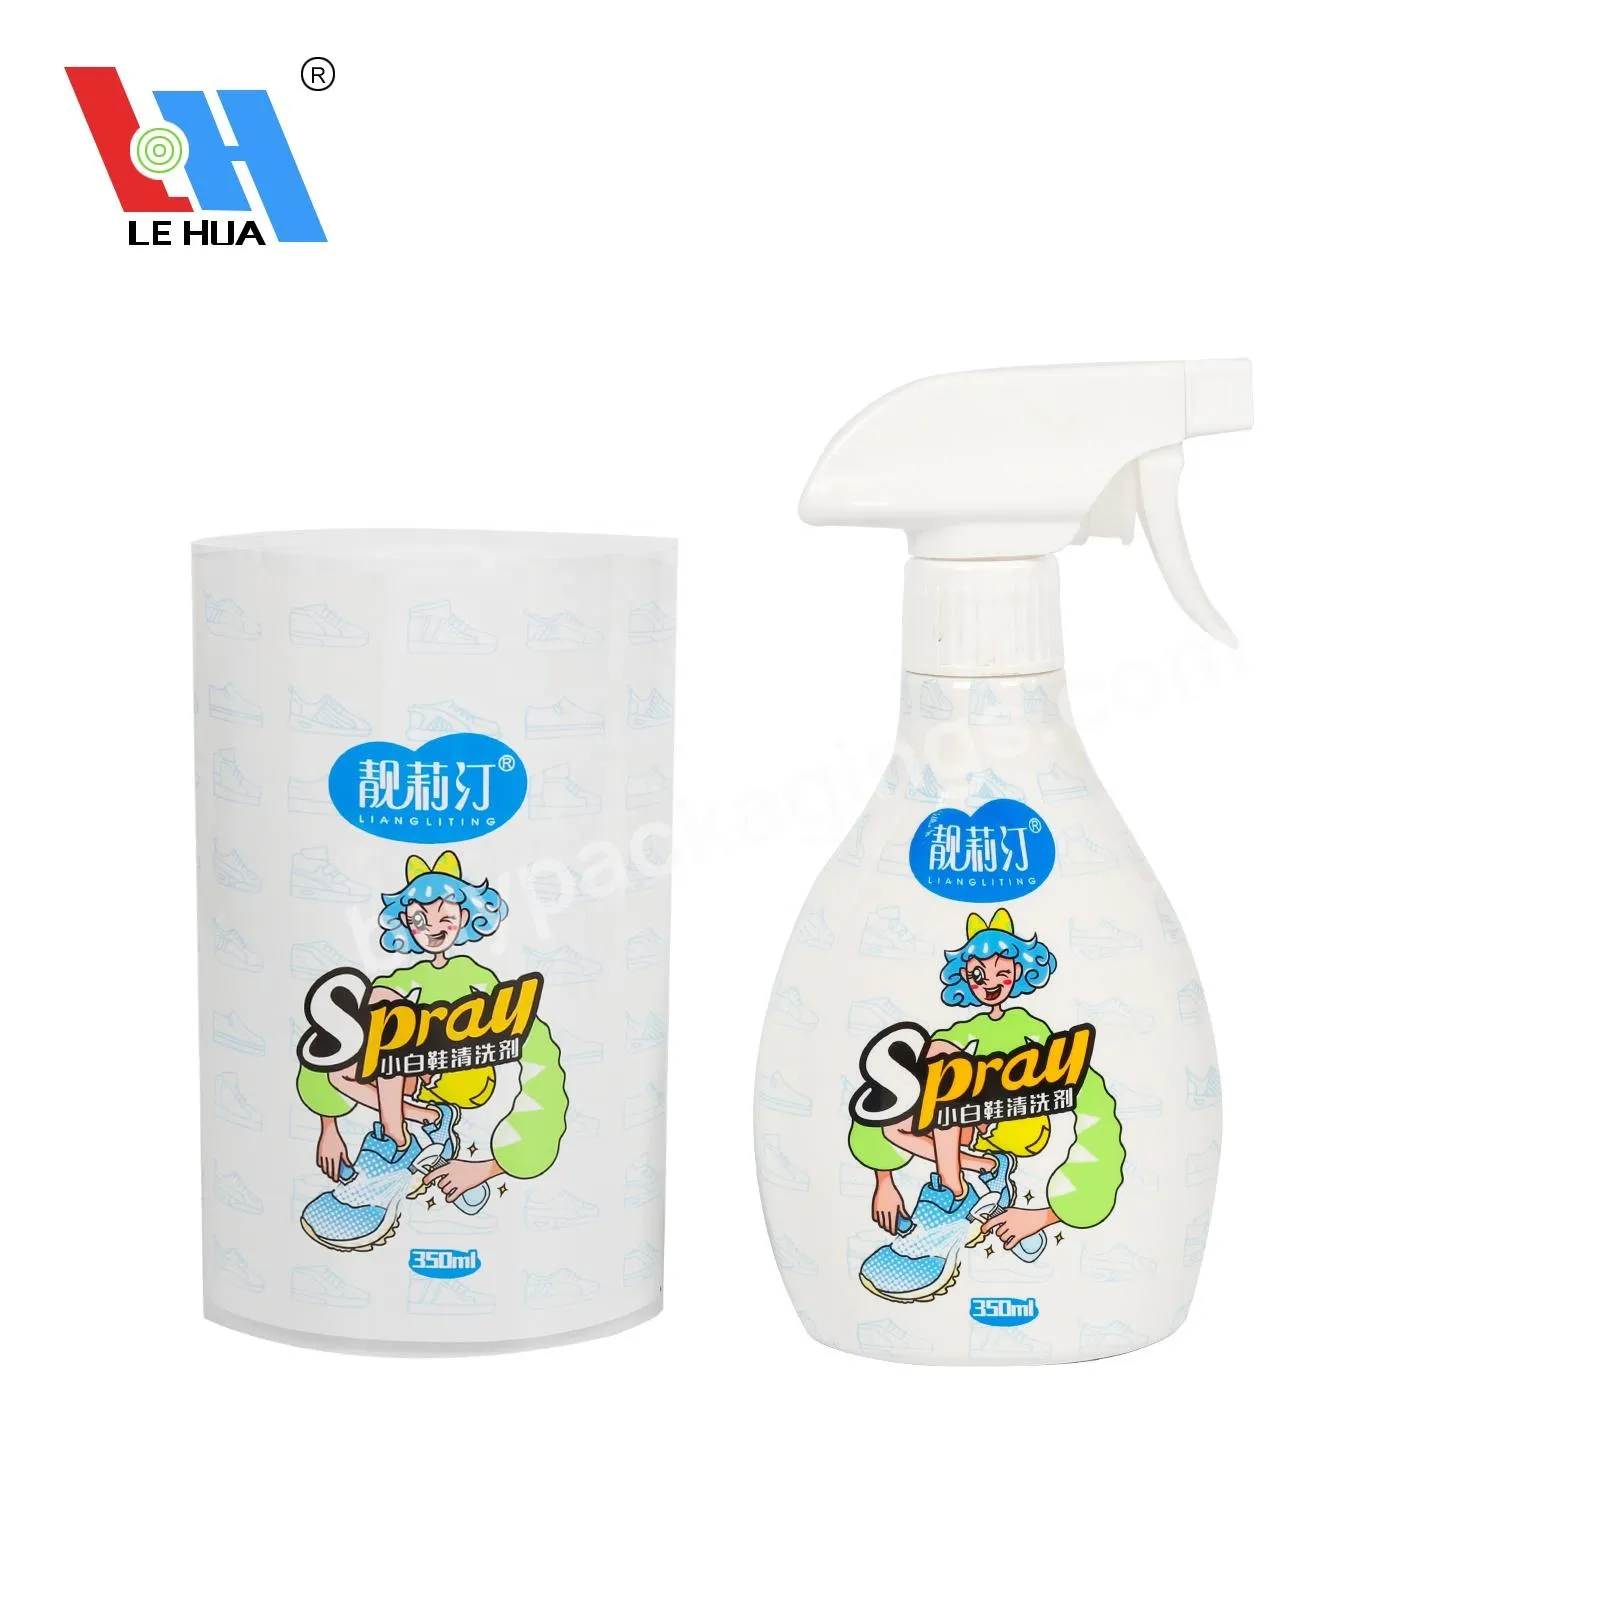 Custom Colorful Waterproof Pvc Pet Heat Wrapping Plastic For Hand Sanitizer Pump Bottle Shrink Sleeve Label - Buy Handwashing Bottle Shrink Sleeve Label Shrink Sleeve Wrap,Printed Shrink Wrap Shrinking Plastic Film,Shrink Wrap Sleeves Label For Hair